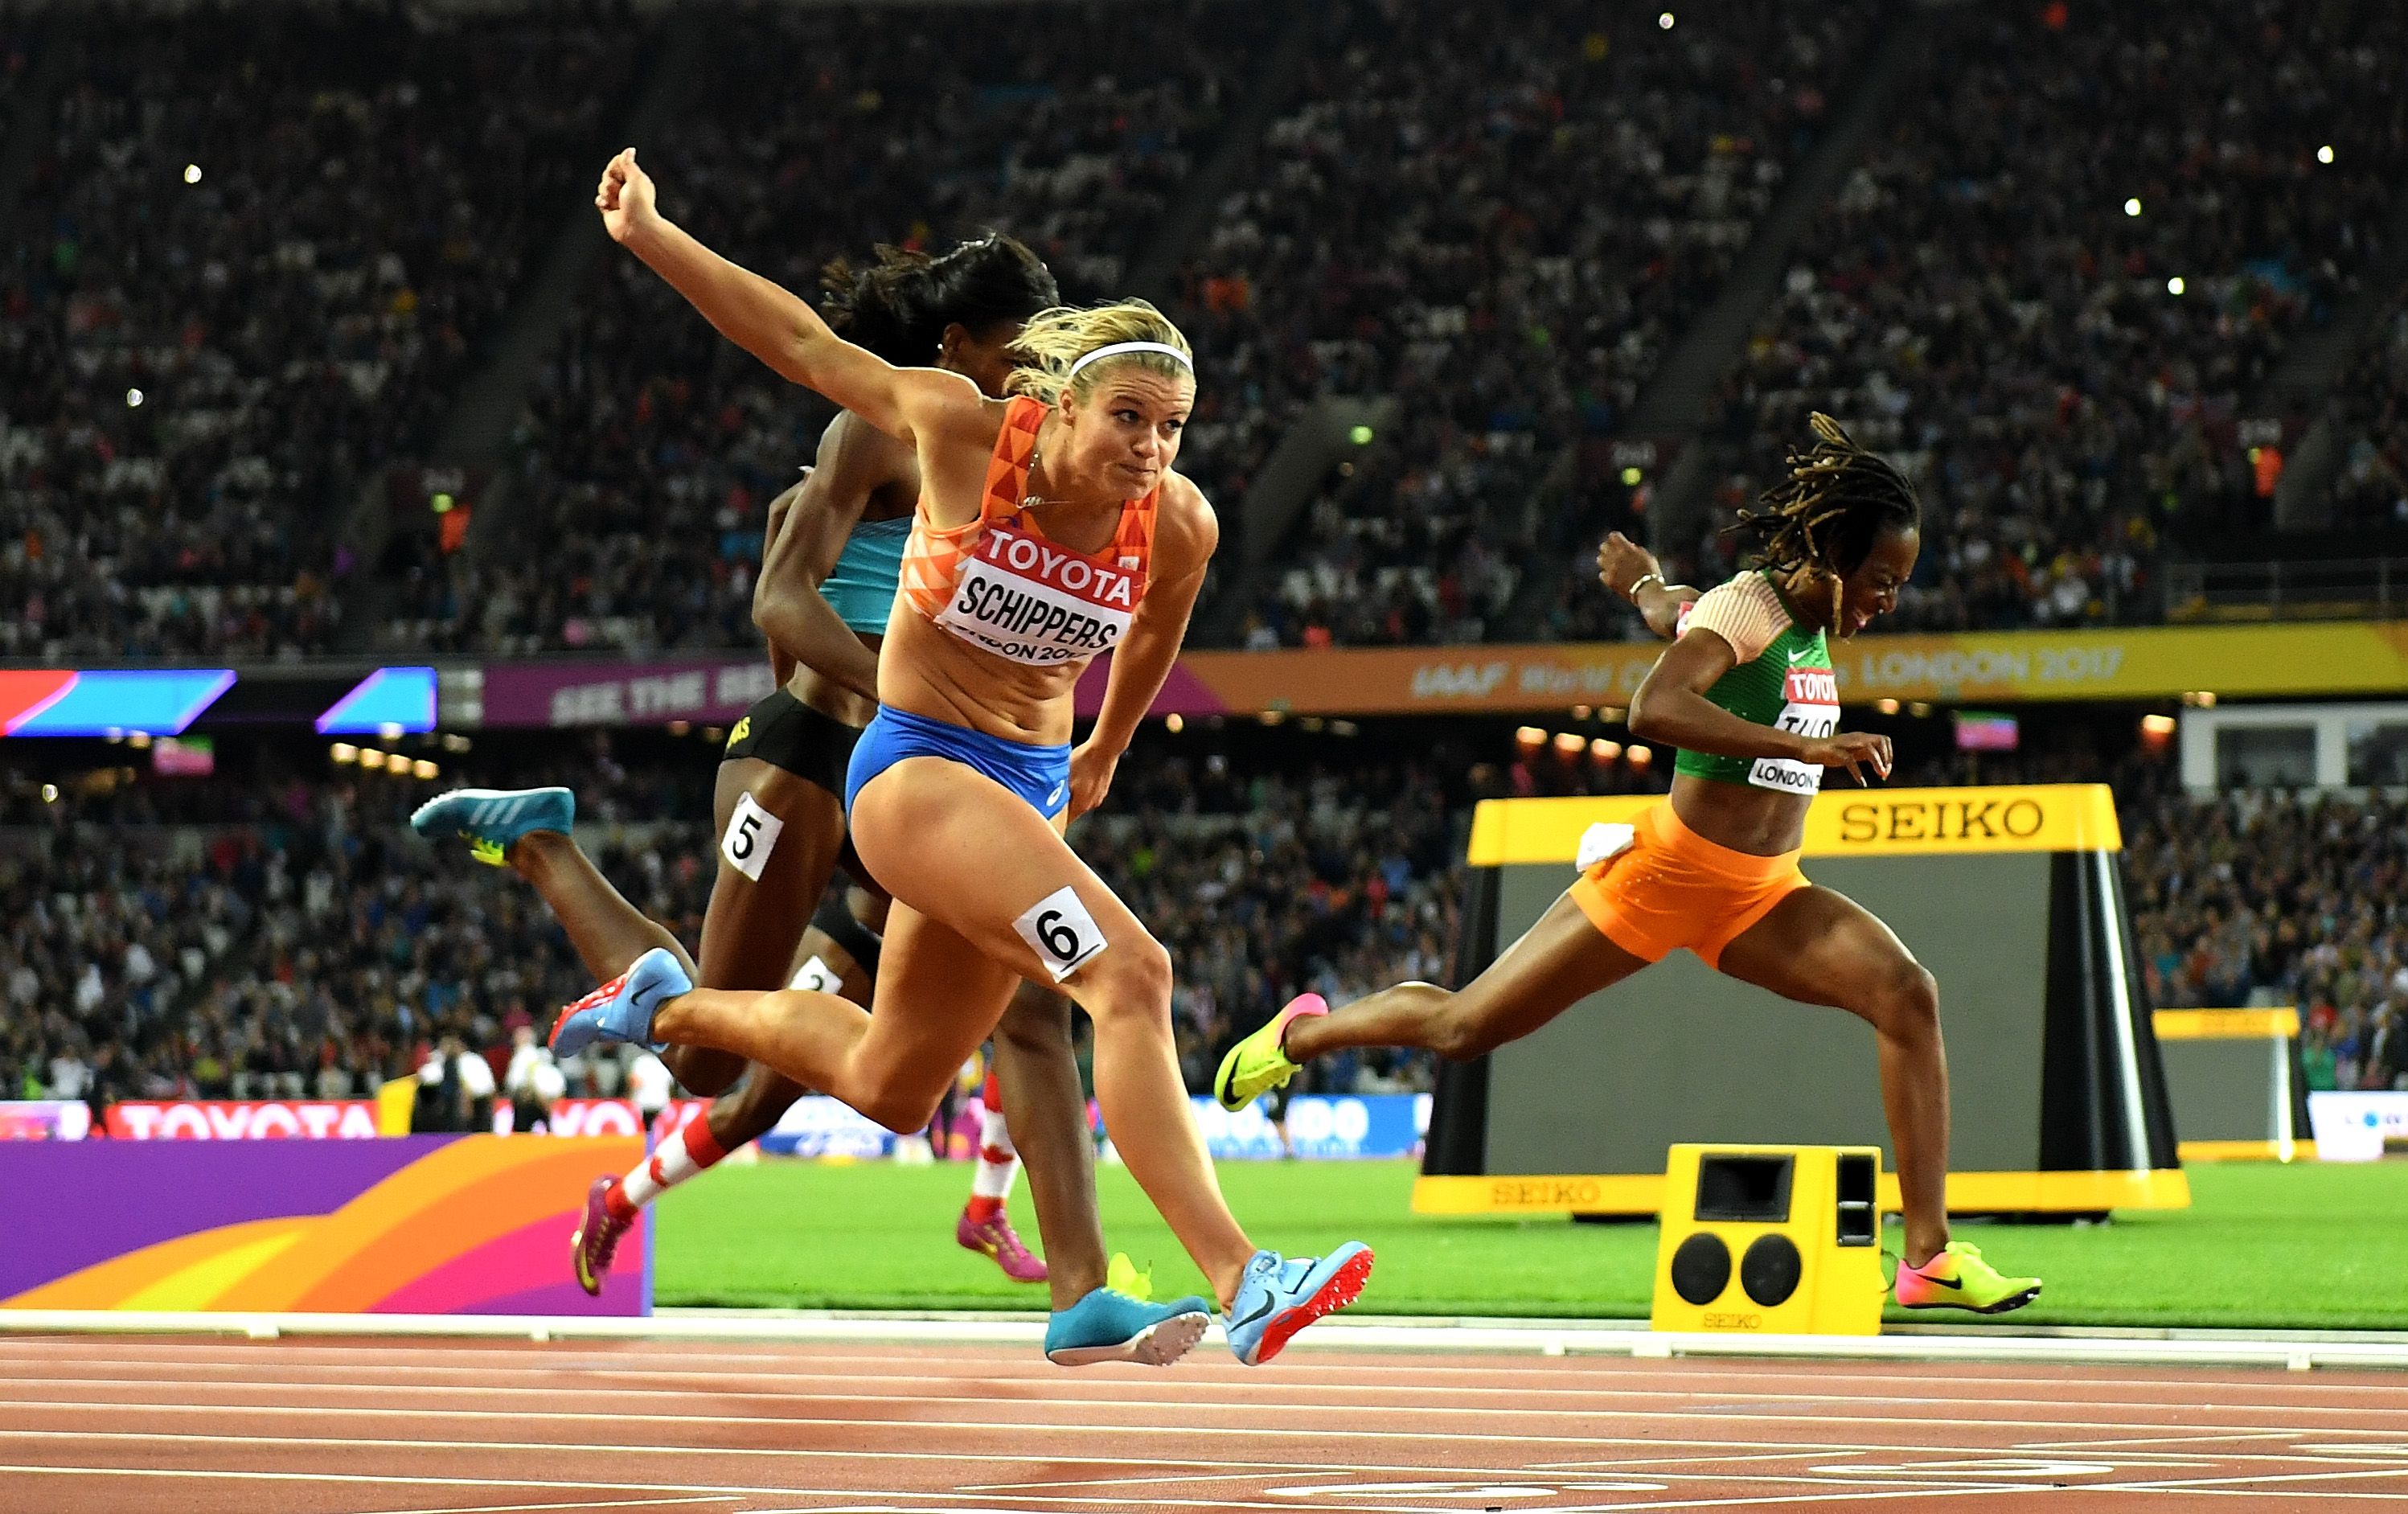 Dafne Schippers retains her world 200m title in London